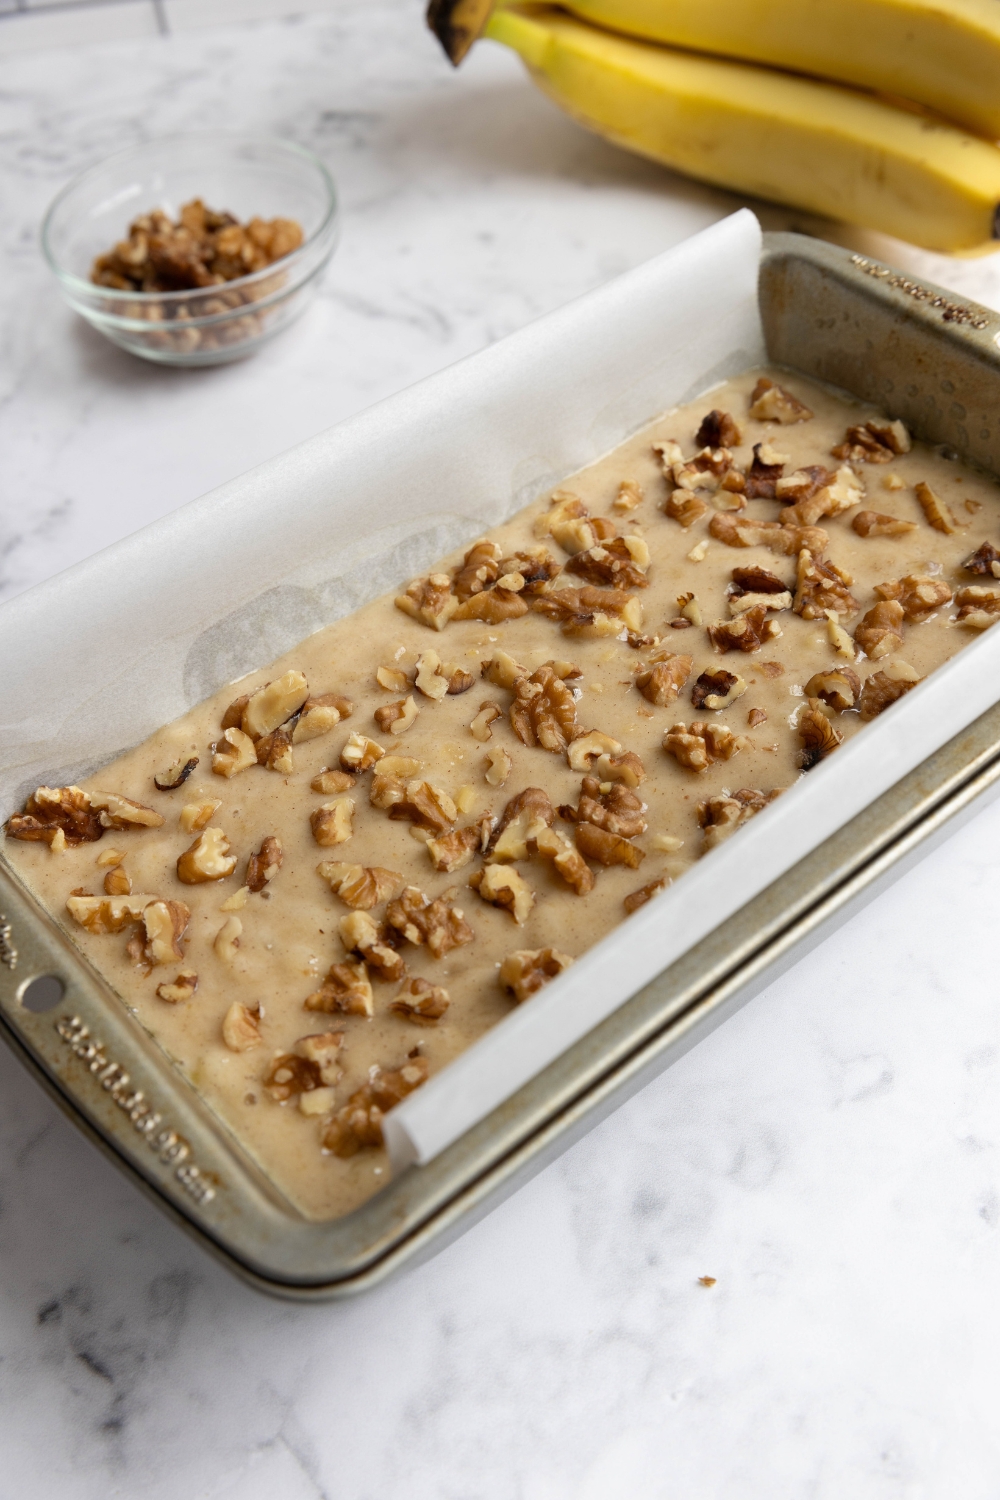 A loaf pan with banana bread batter topped with chopped walnuts.